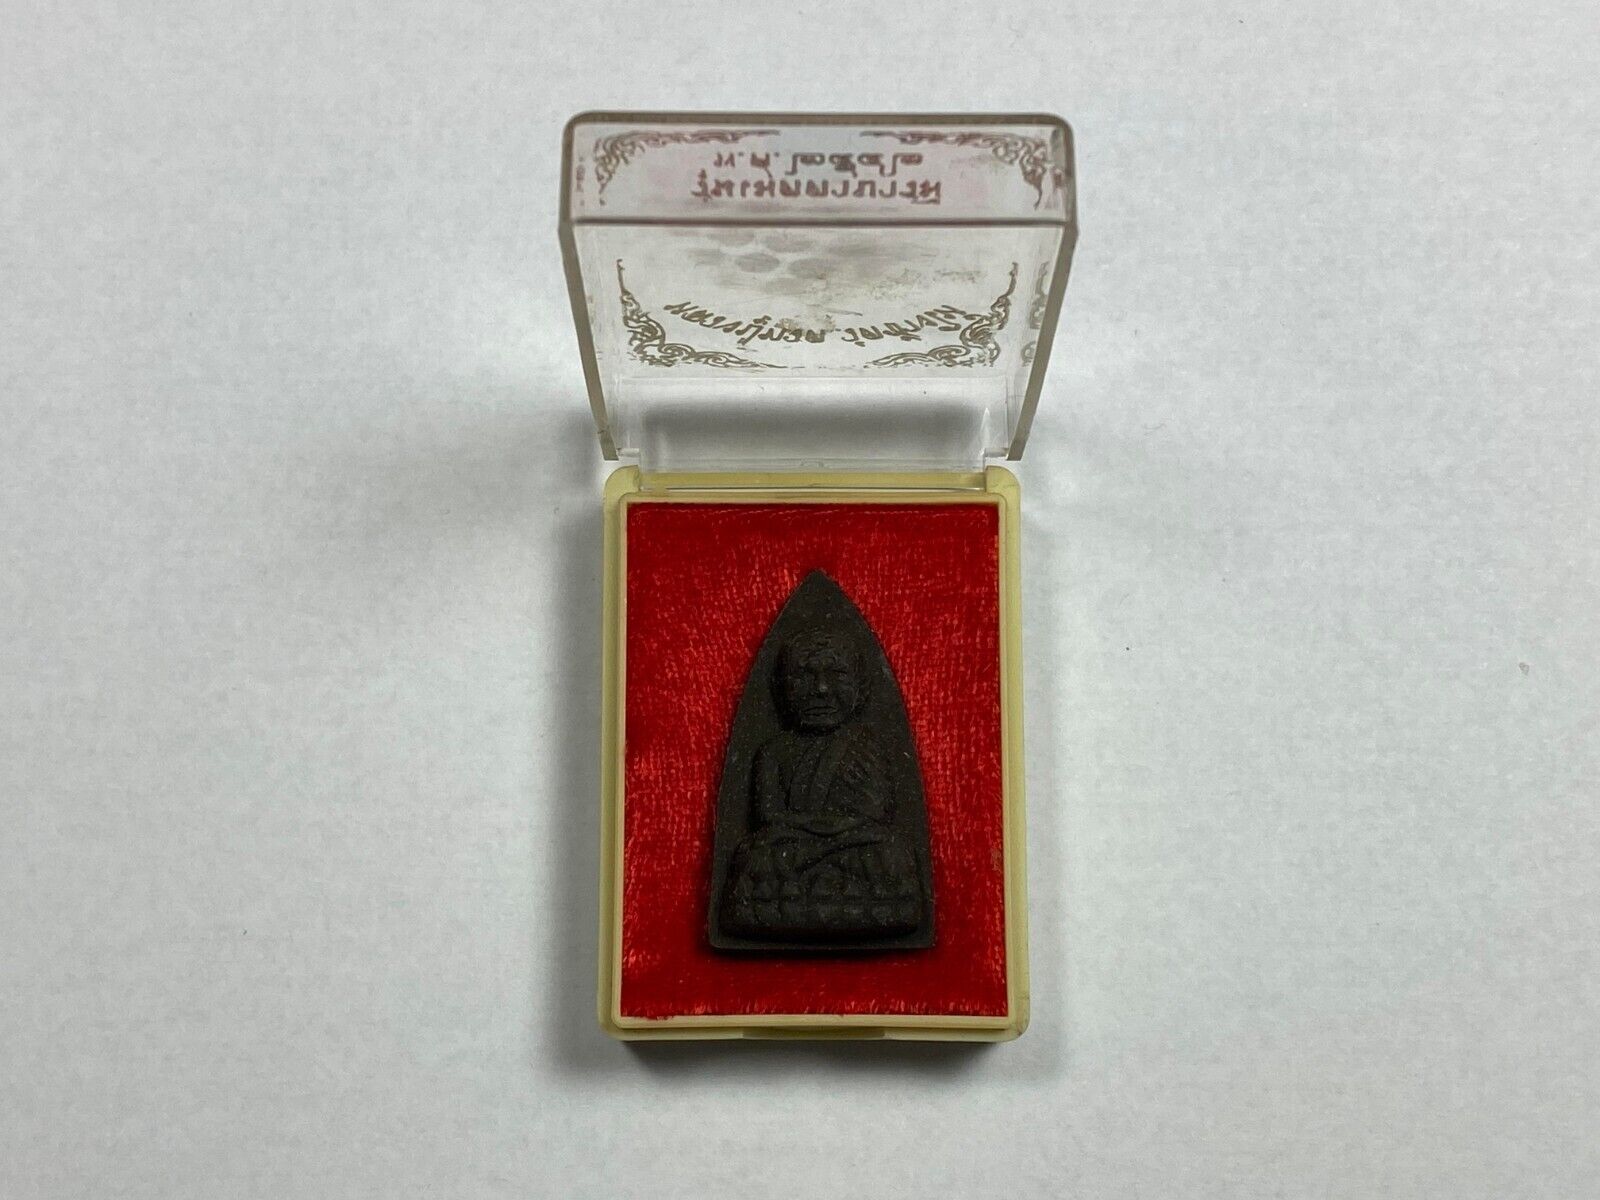 Authentic Boxed Buddha Amulet from Thailand in Protective Box